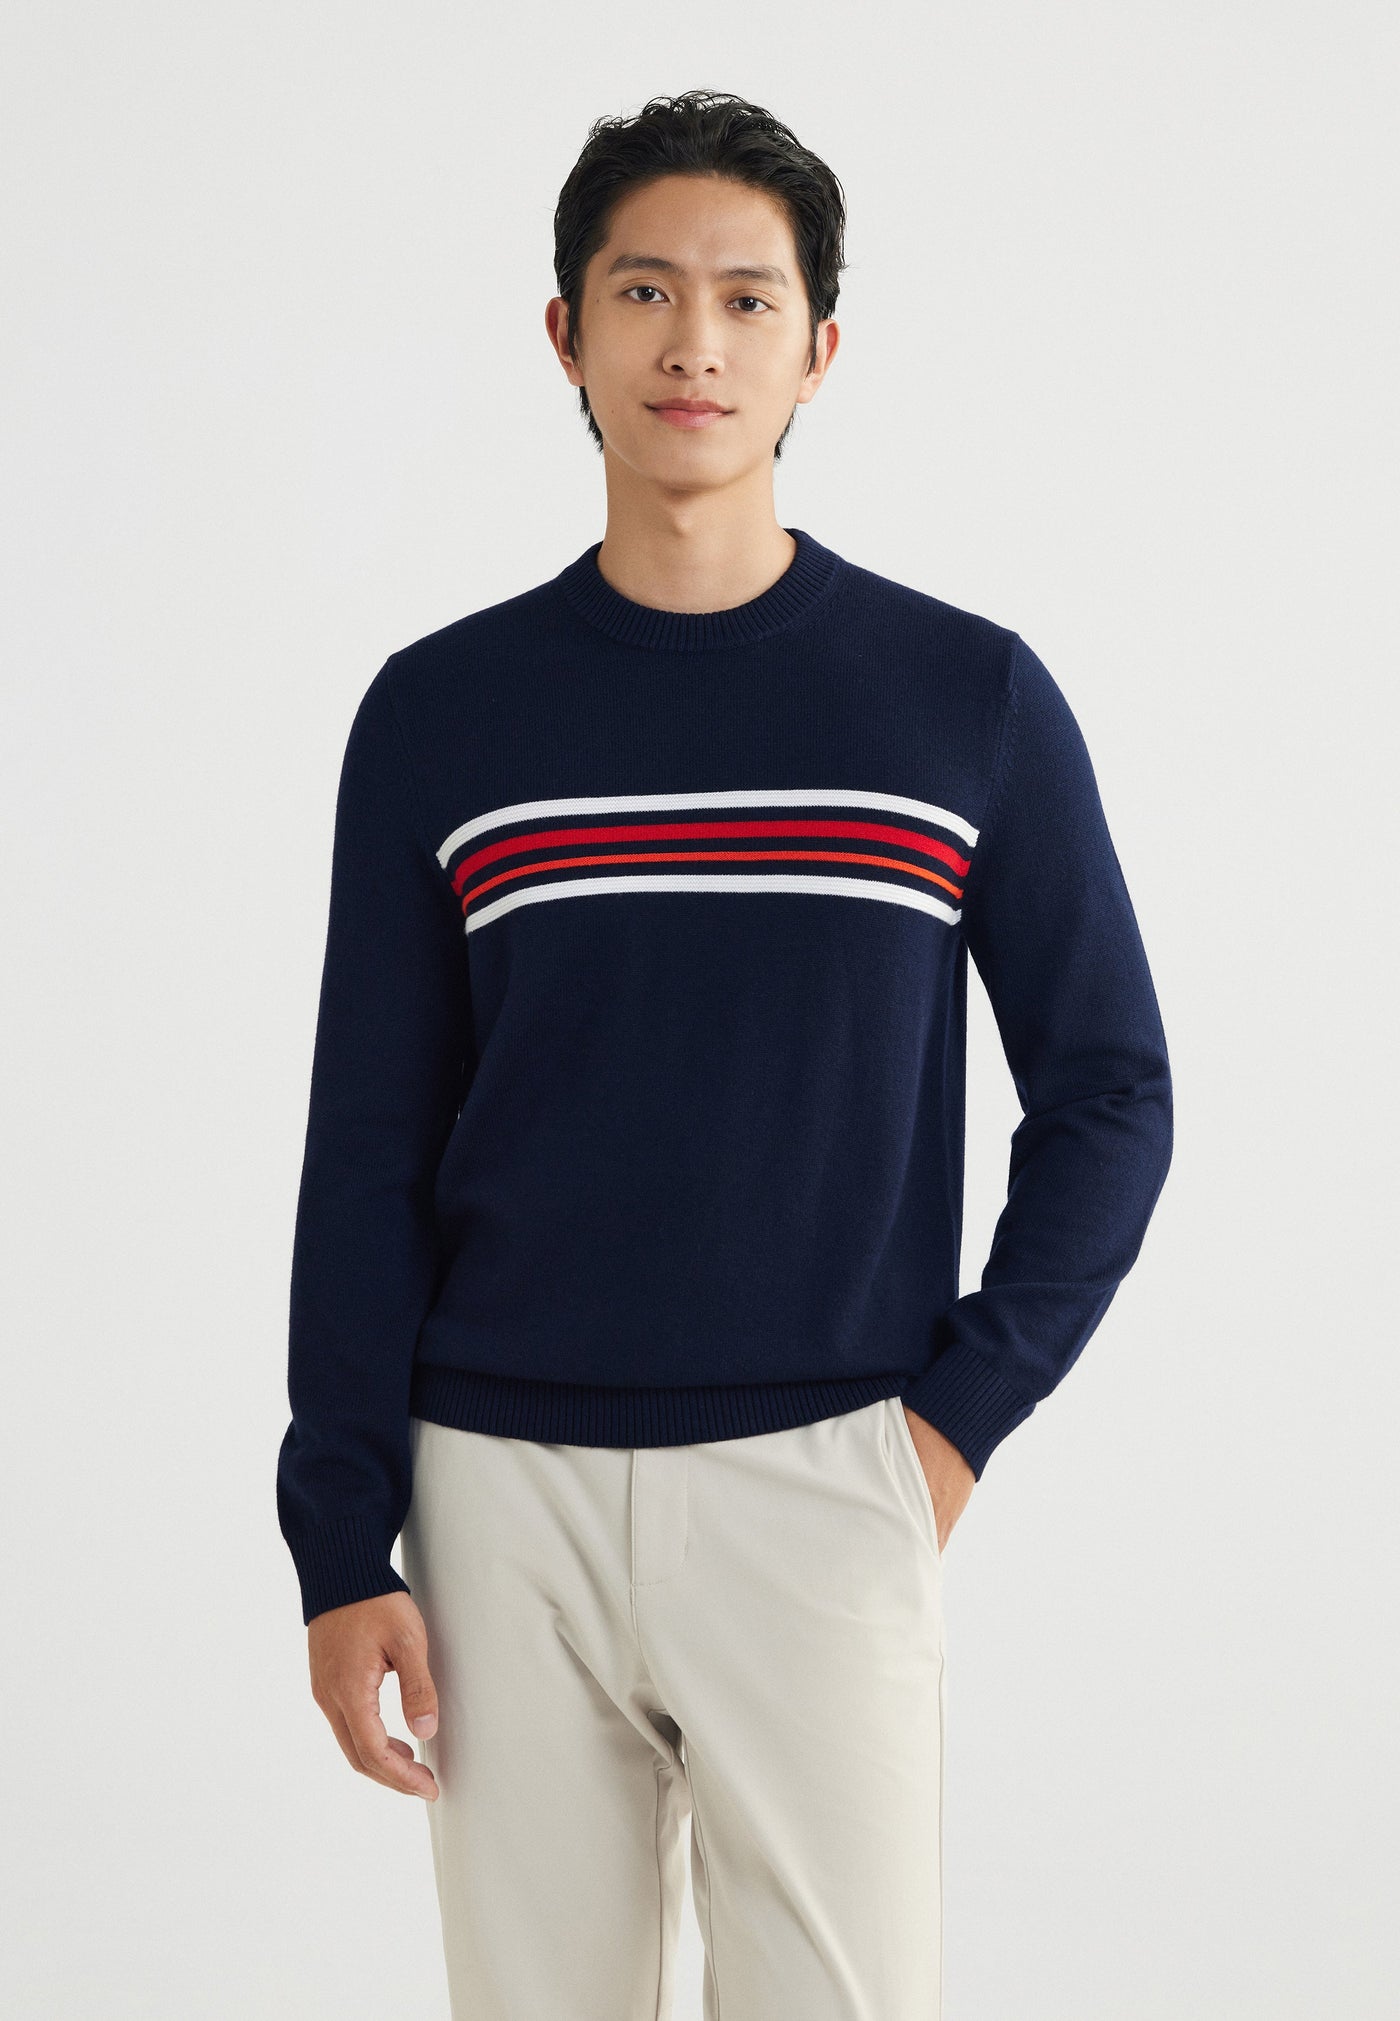 Men Clothing Cable Knitted Sweater Slim Fit